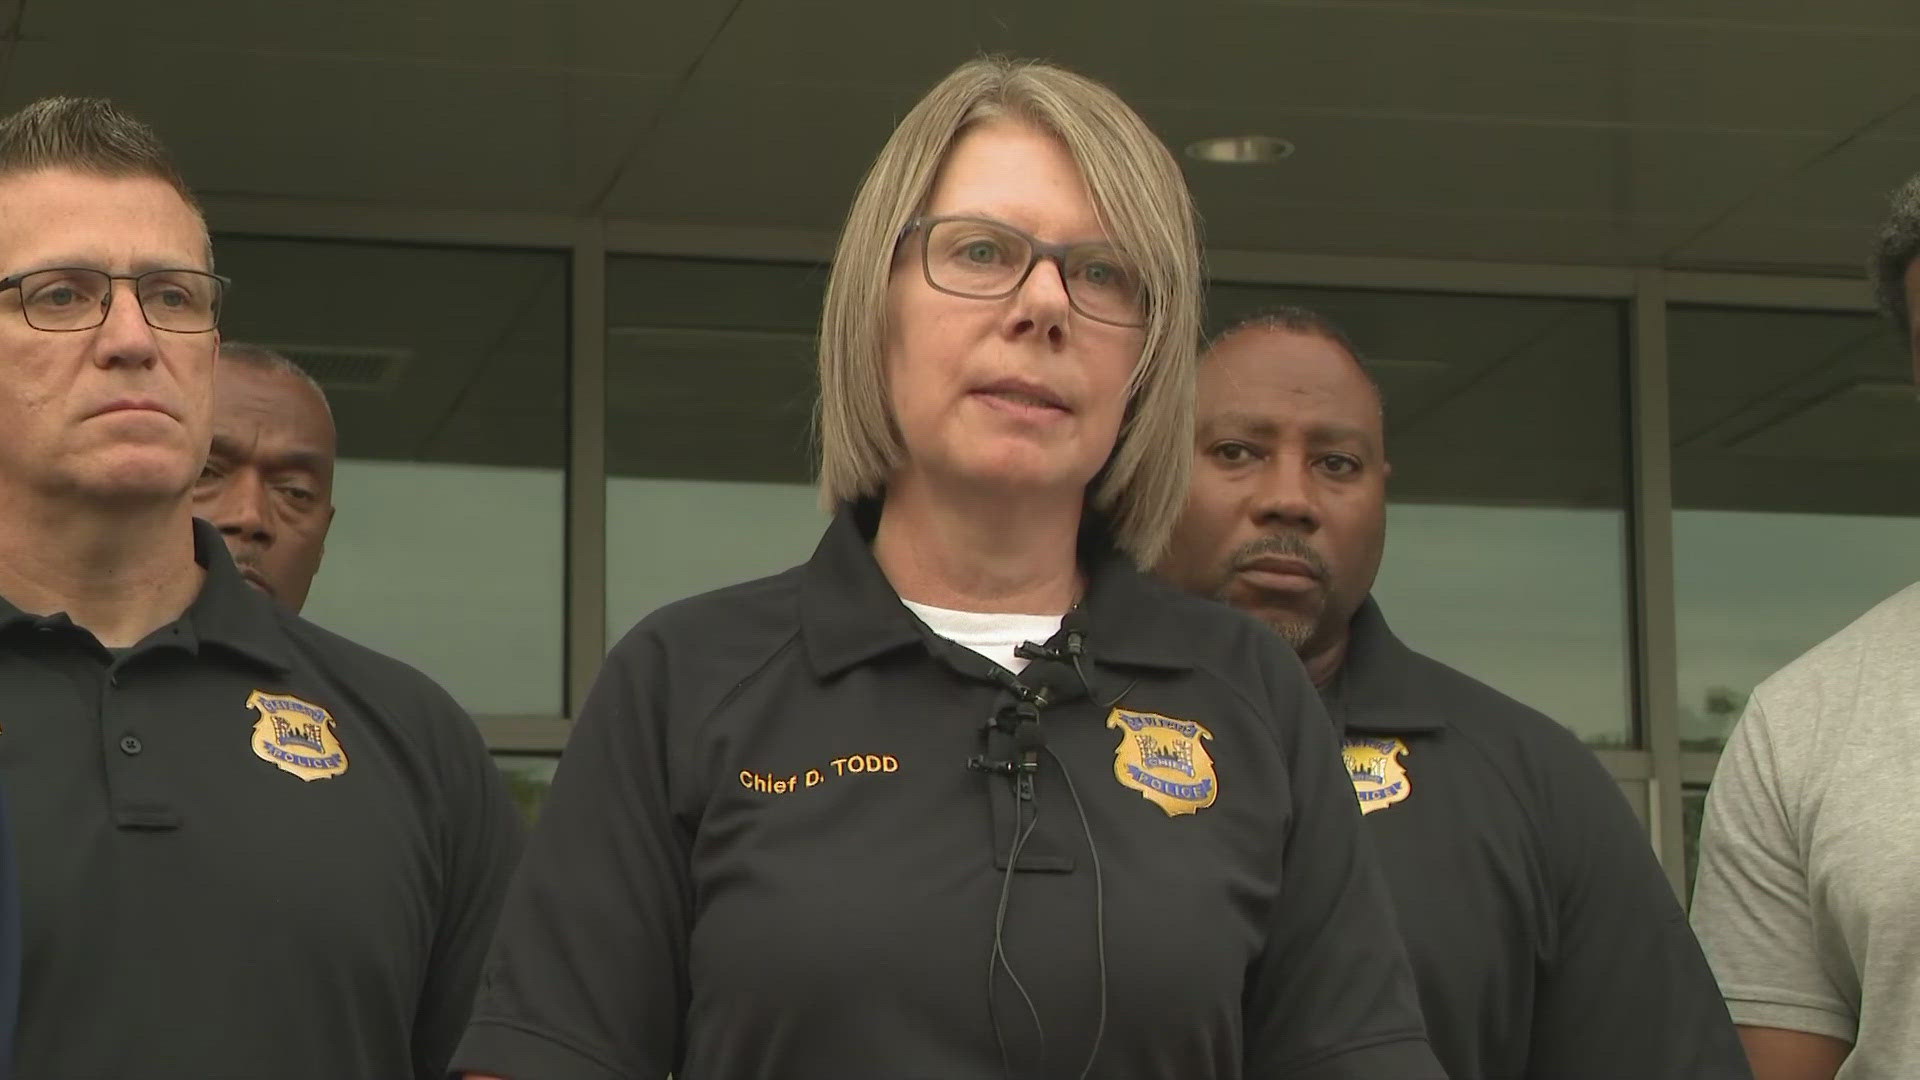 Cleveland Police Chief Annie Todd is asking for the public to show their support for the city's police after one officer was killed in a shooting.